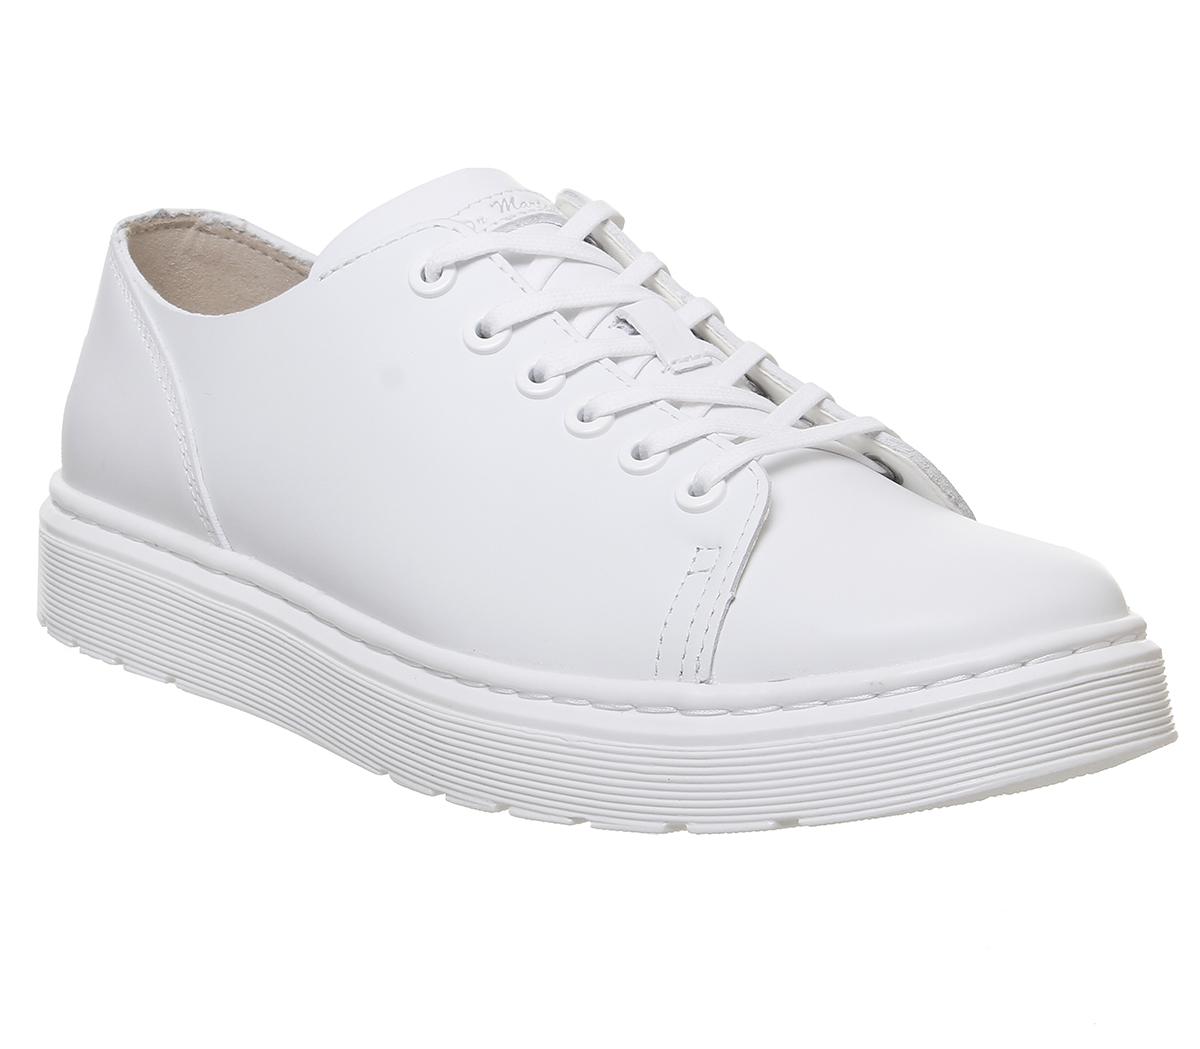 Dr. Martens Dante 6 Eye Trainers White - Casual